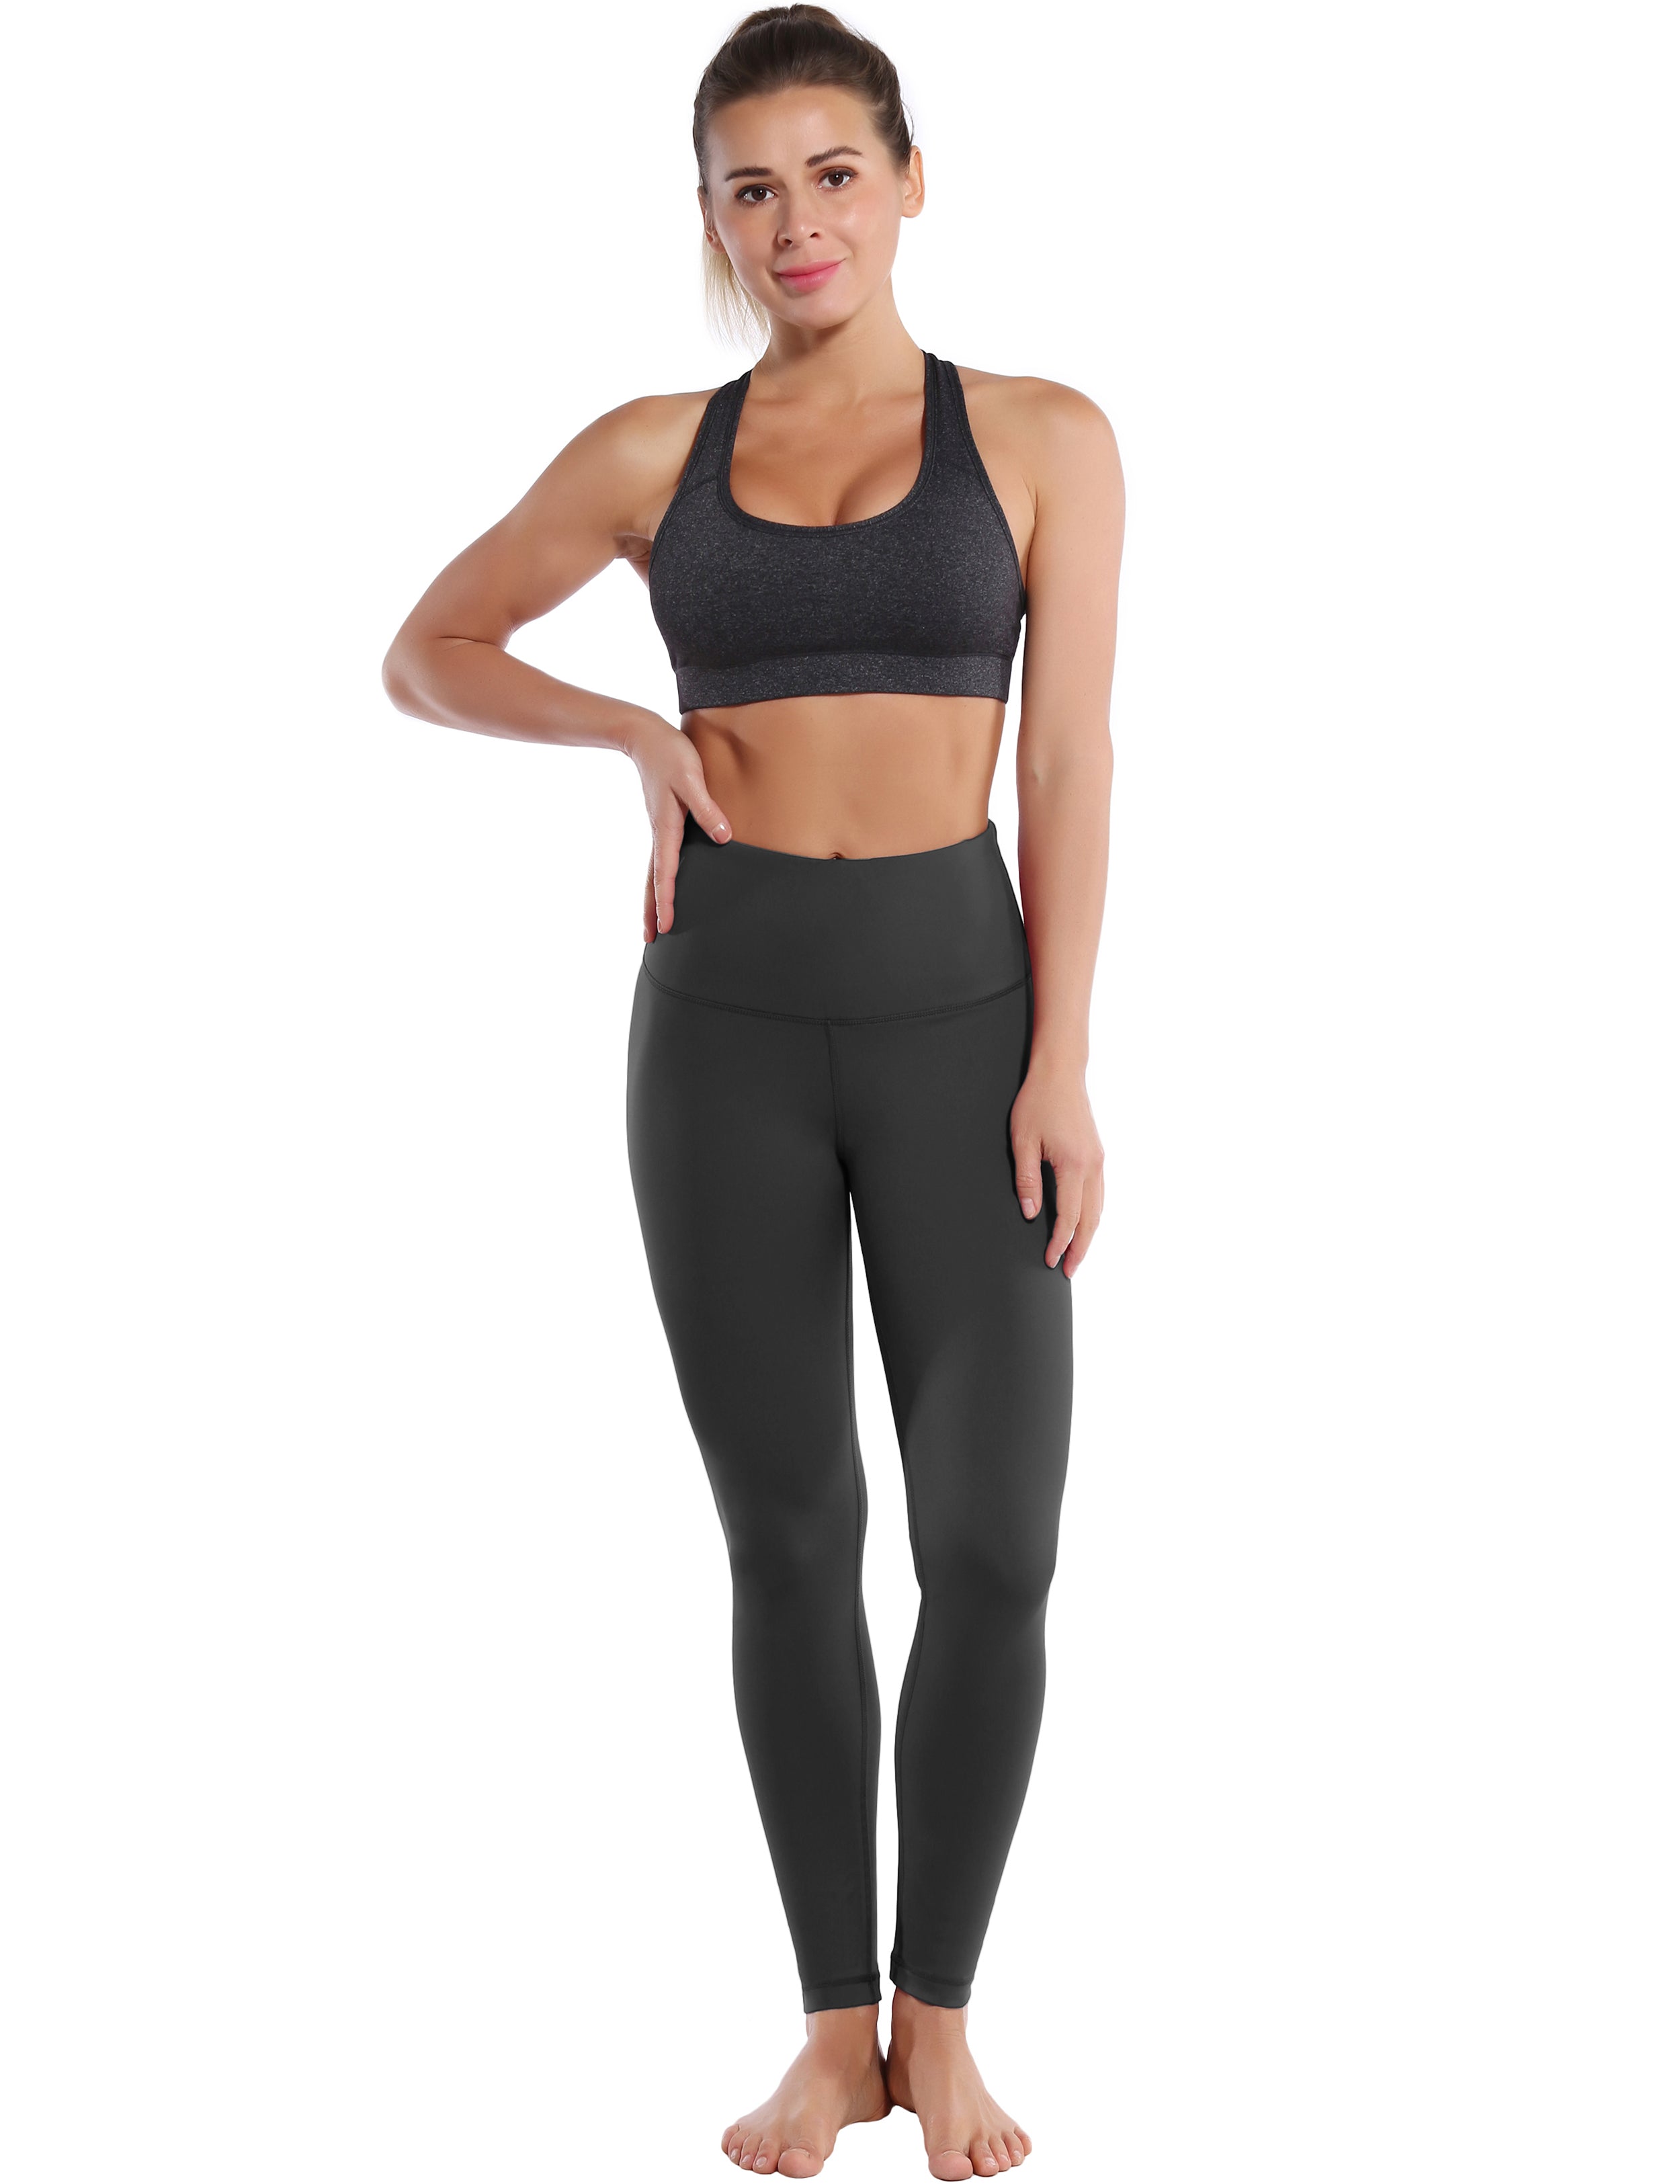 High Waist Jogging Pants shadowcharcoal 75%Nylon/25%Spandex Fabric doesn't attract lint easily 4-way stretch No see-through Moisture-wicking Tummy control Inner pocket Four lengths